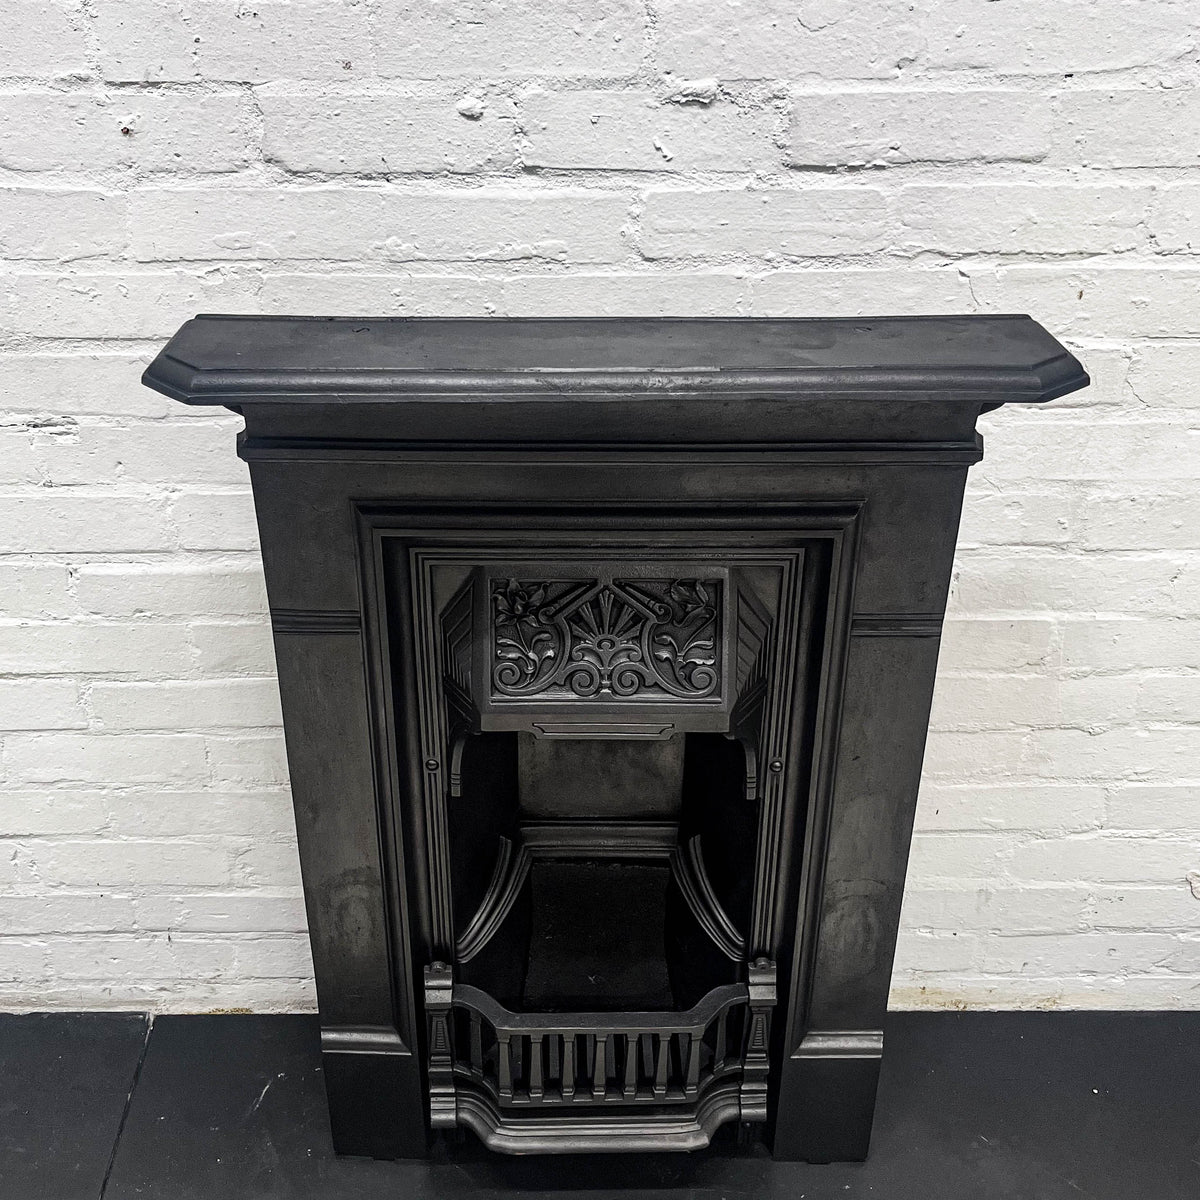 Antique Edwardian Cast Iron Bedroom Combination Fireplace | The Architectural Forum